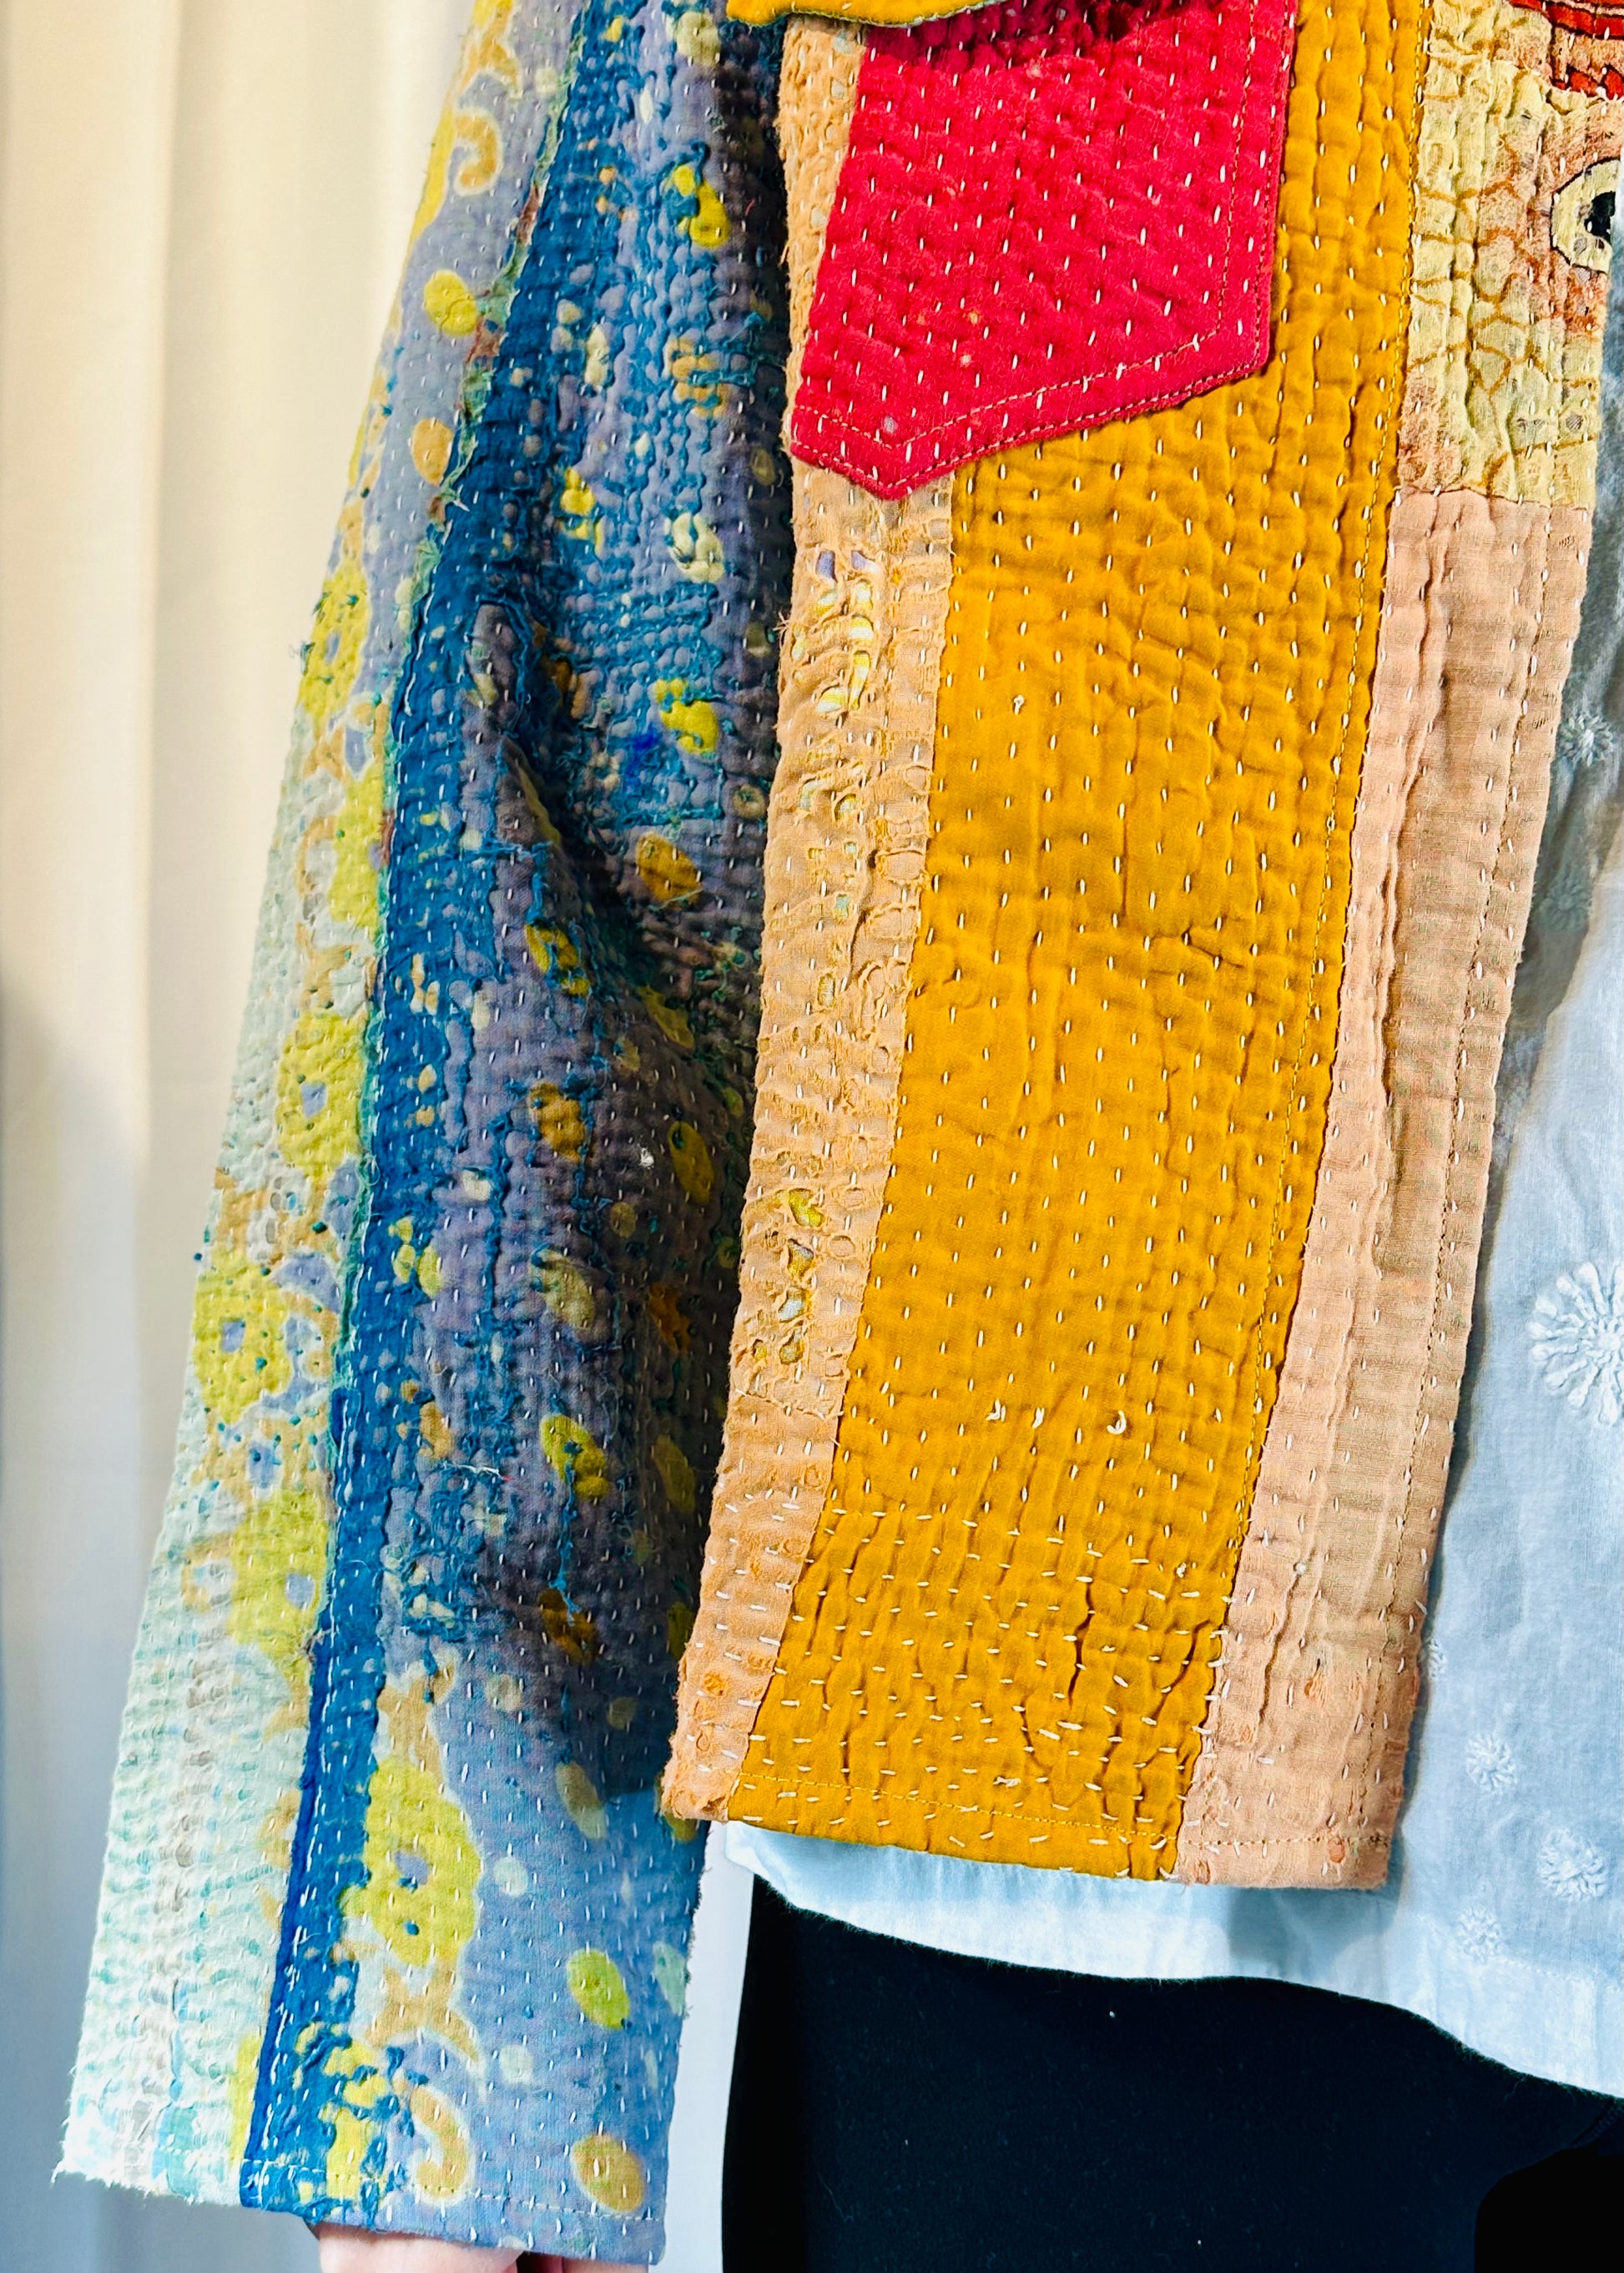 Sustainably Crafted Unique Quilted Trucker Jacket in Vibrant Orange, Red, and Blue from Recycled Saris - DharBazaar